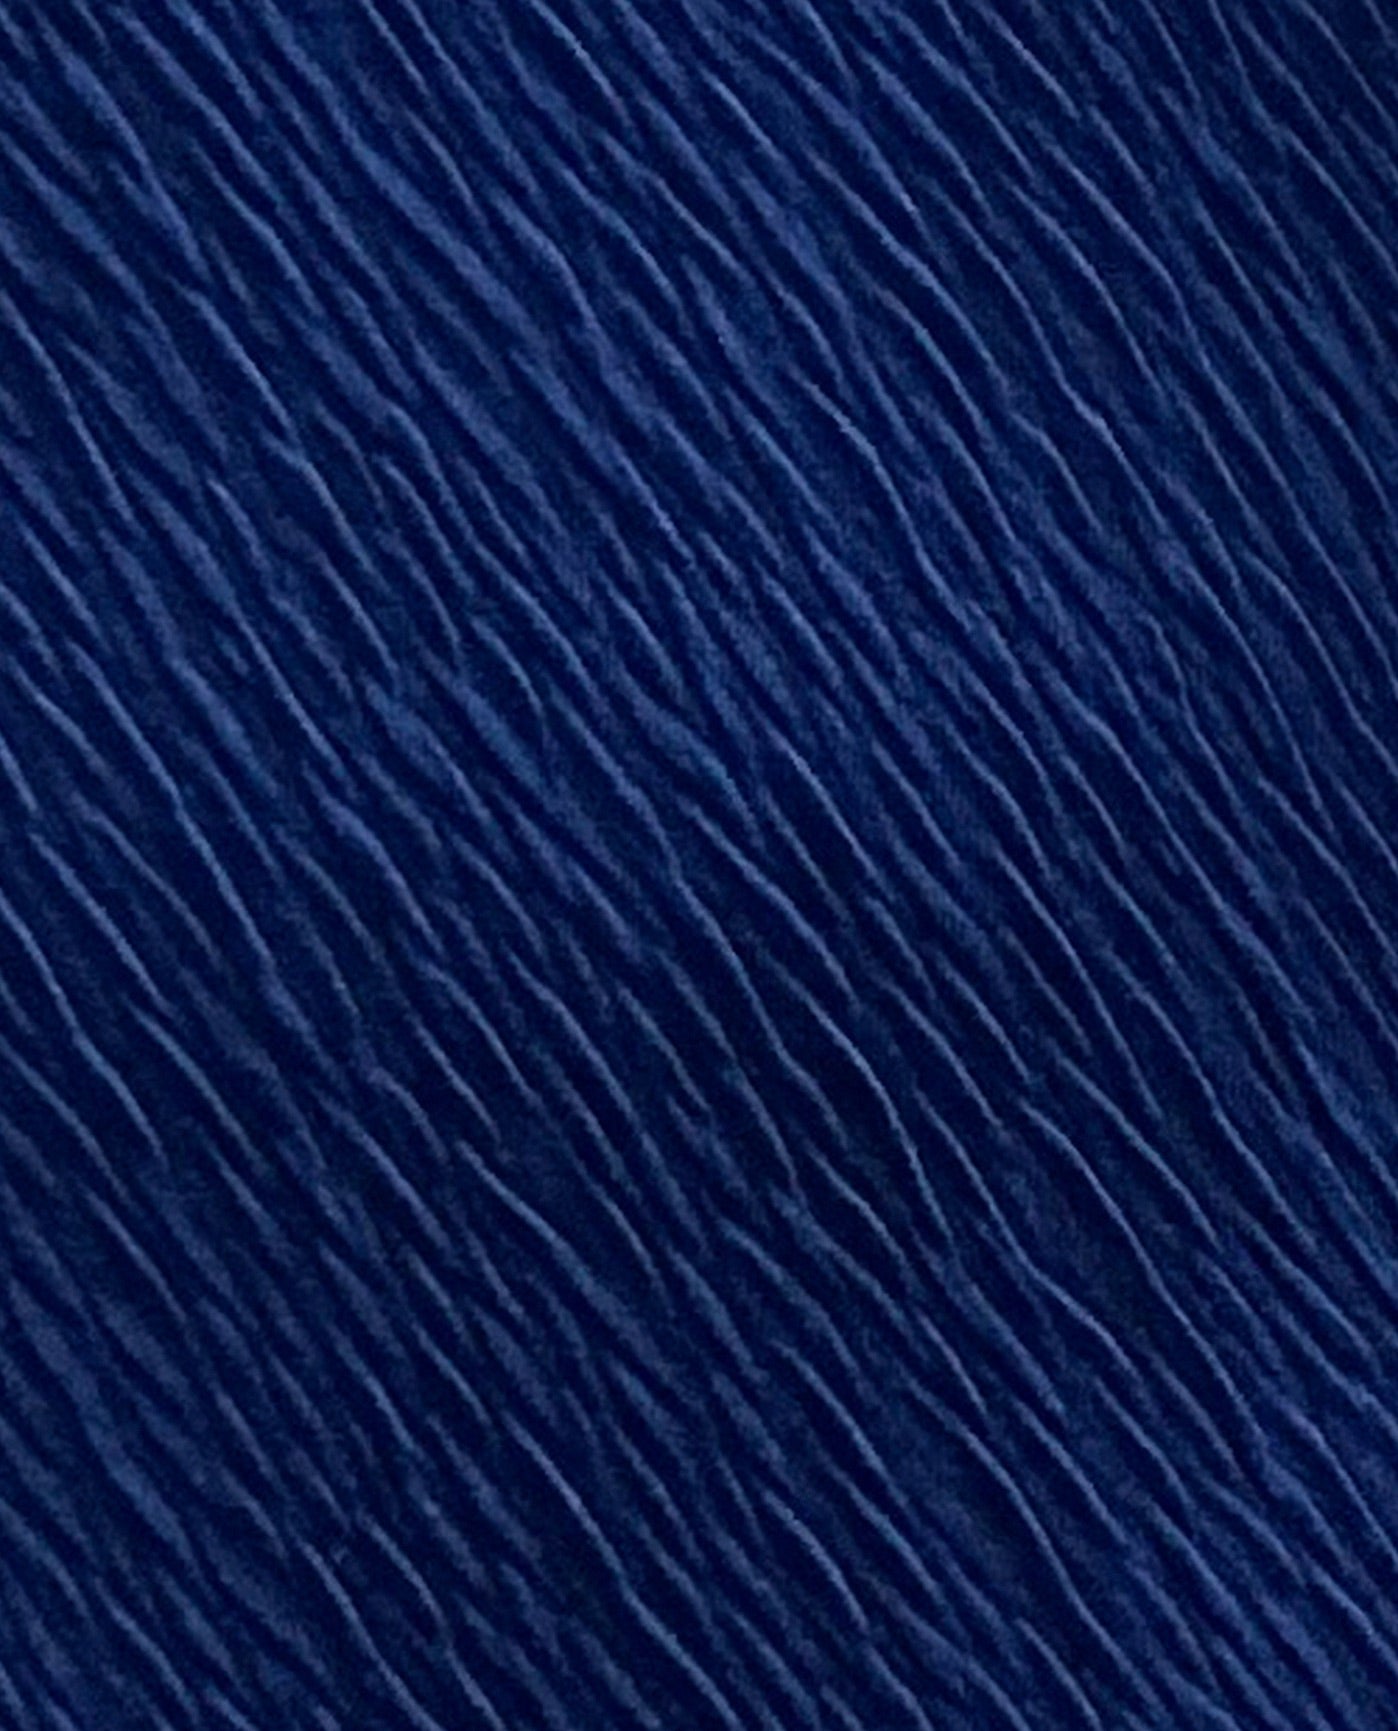 FABRIC DETAIL VIEW OF CHLORINE RESISTANT AQUAMORE SOLID LUXE TEXTURED HIGH NECK ONE PIECE SWIMSUIT | 058 AQL LUXE NAVY